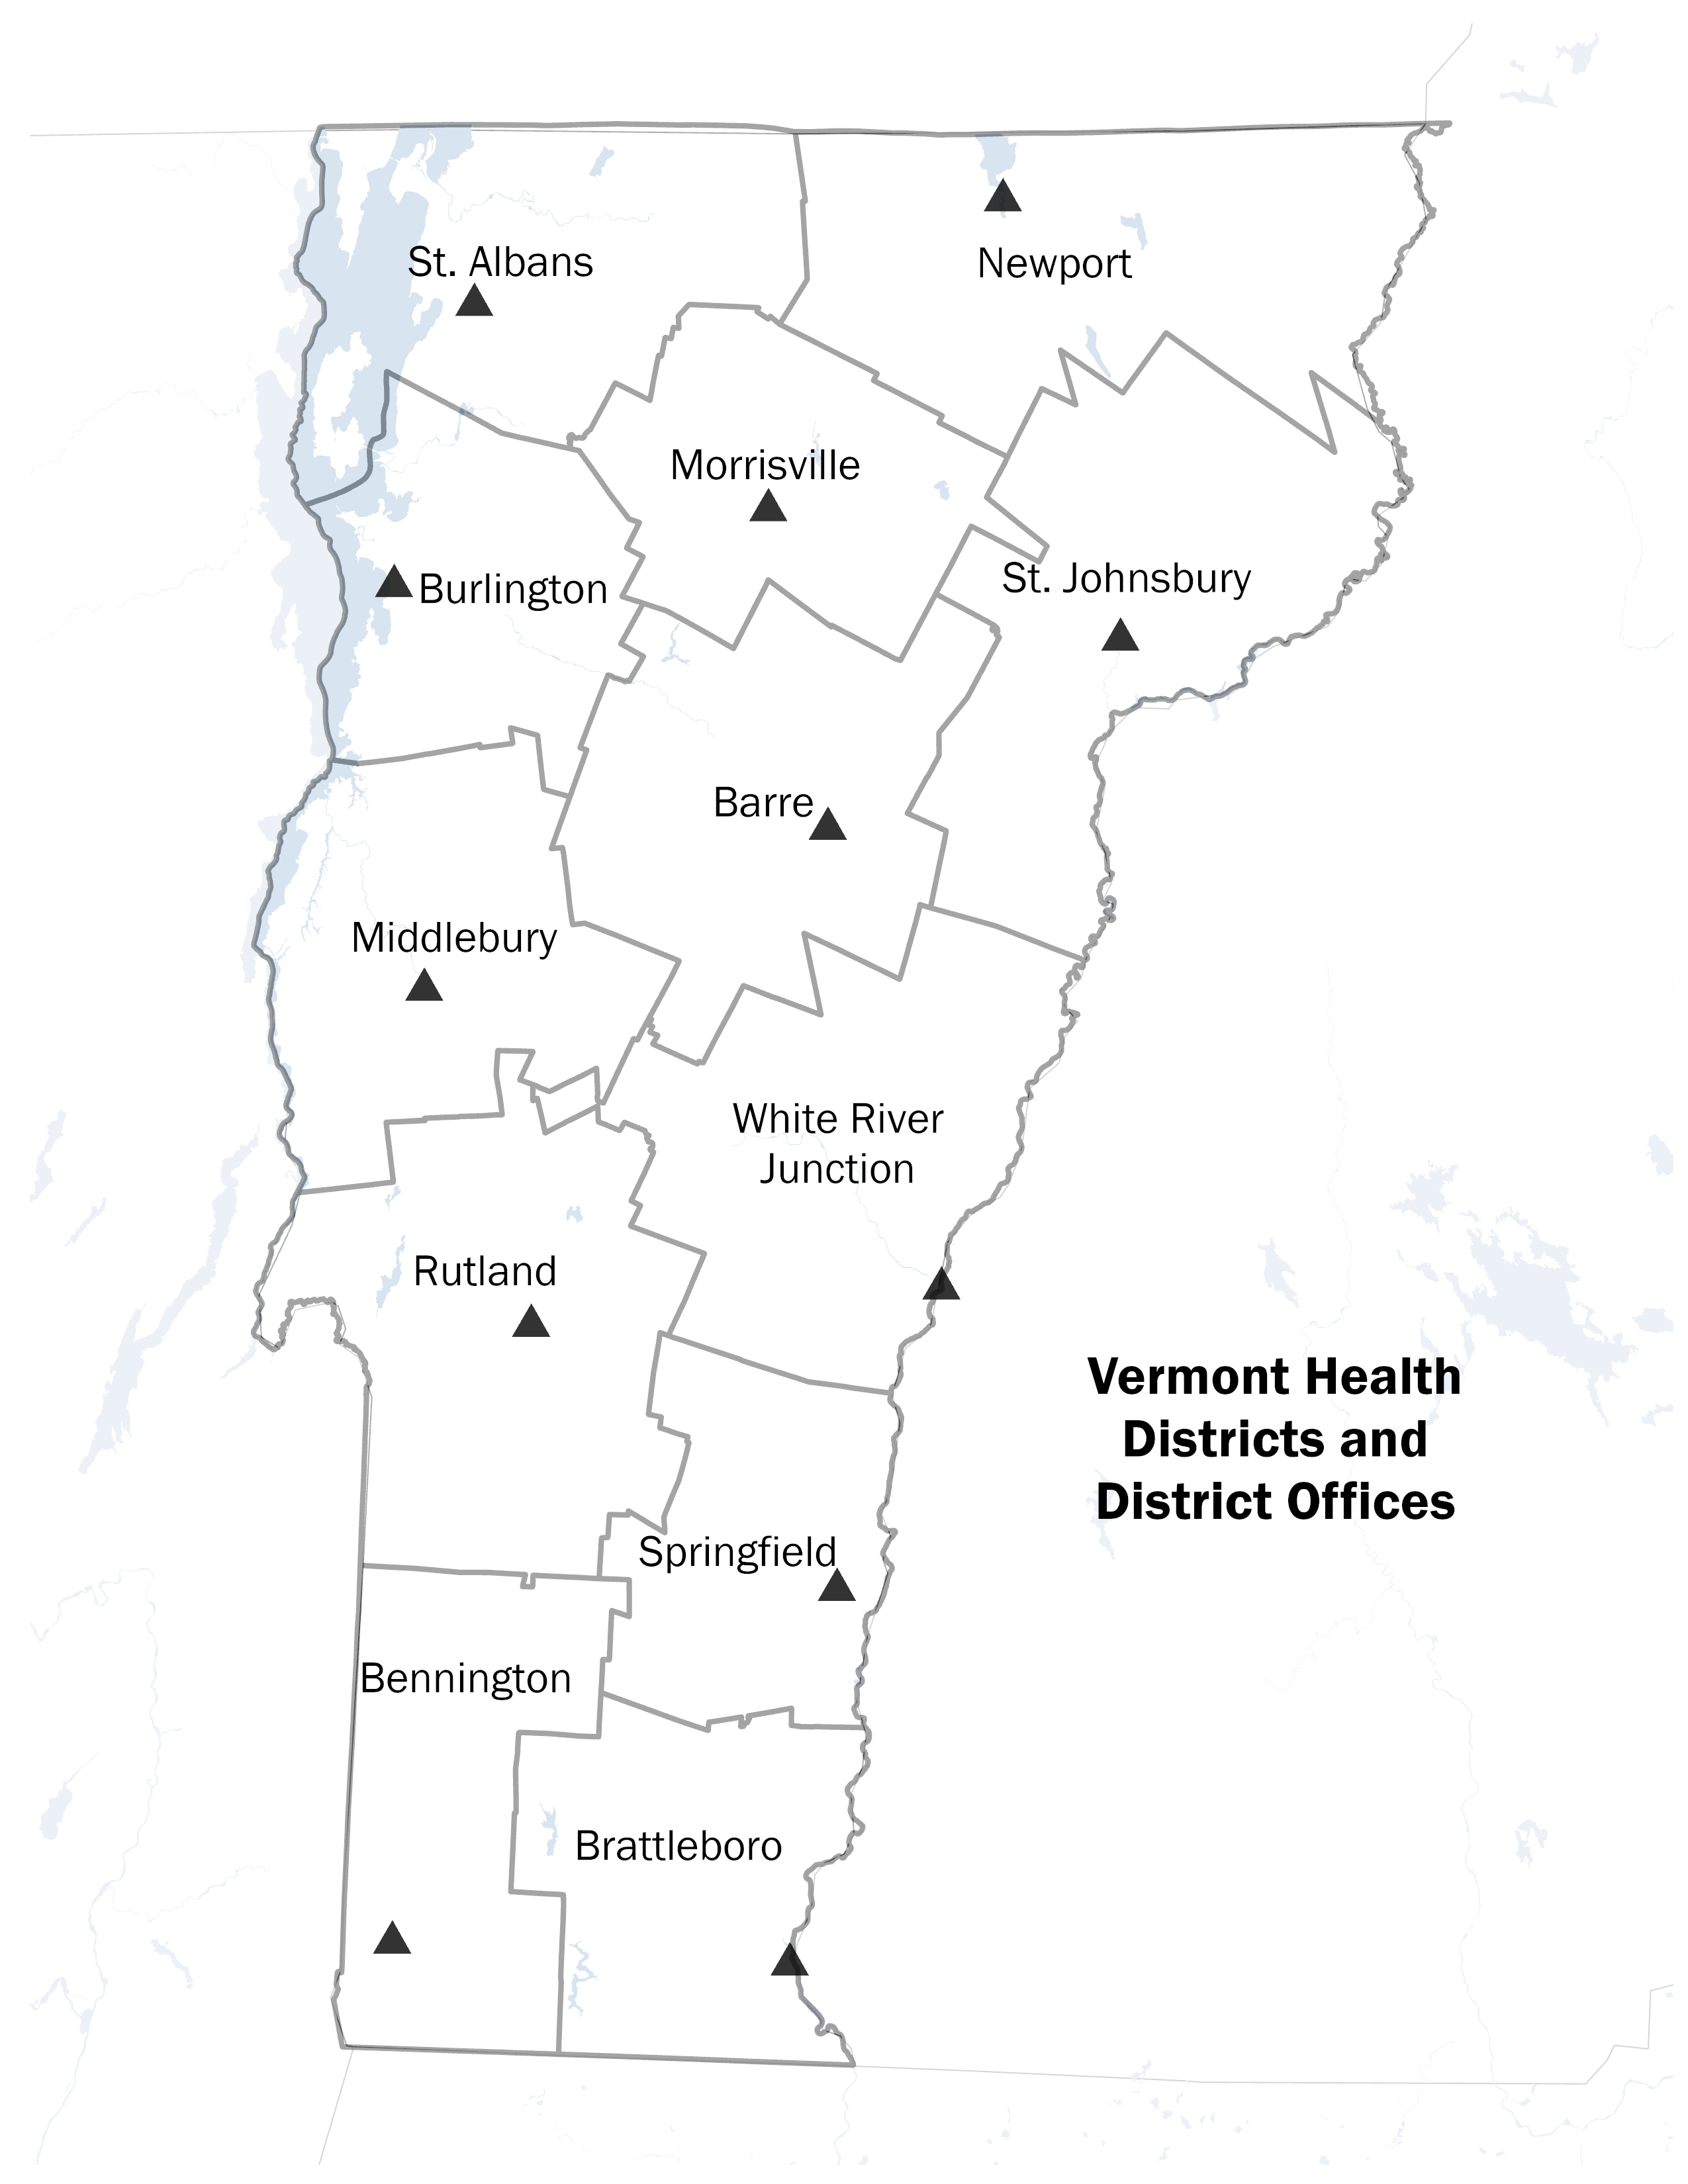 Map showing Vermont District Offices and district boundaries